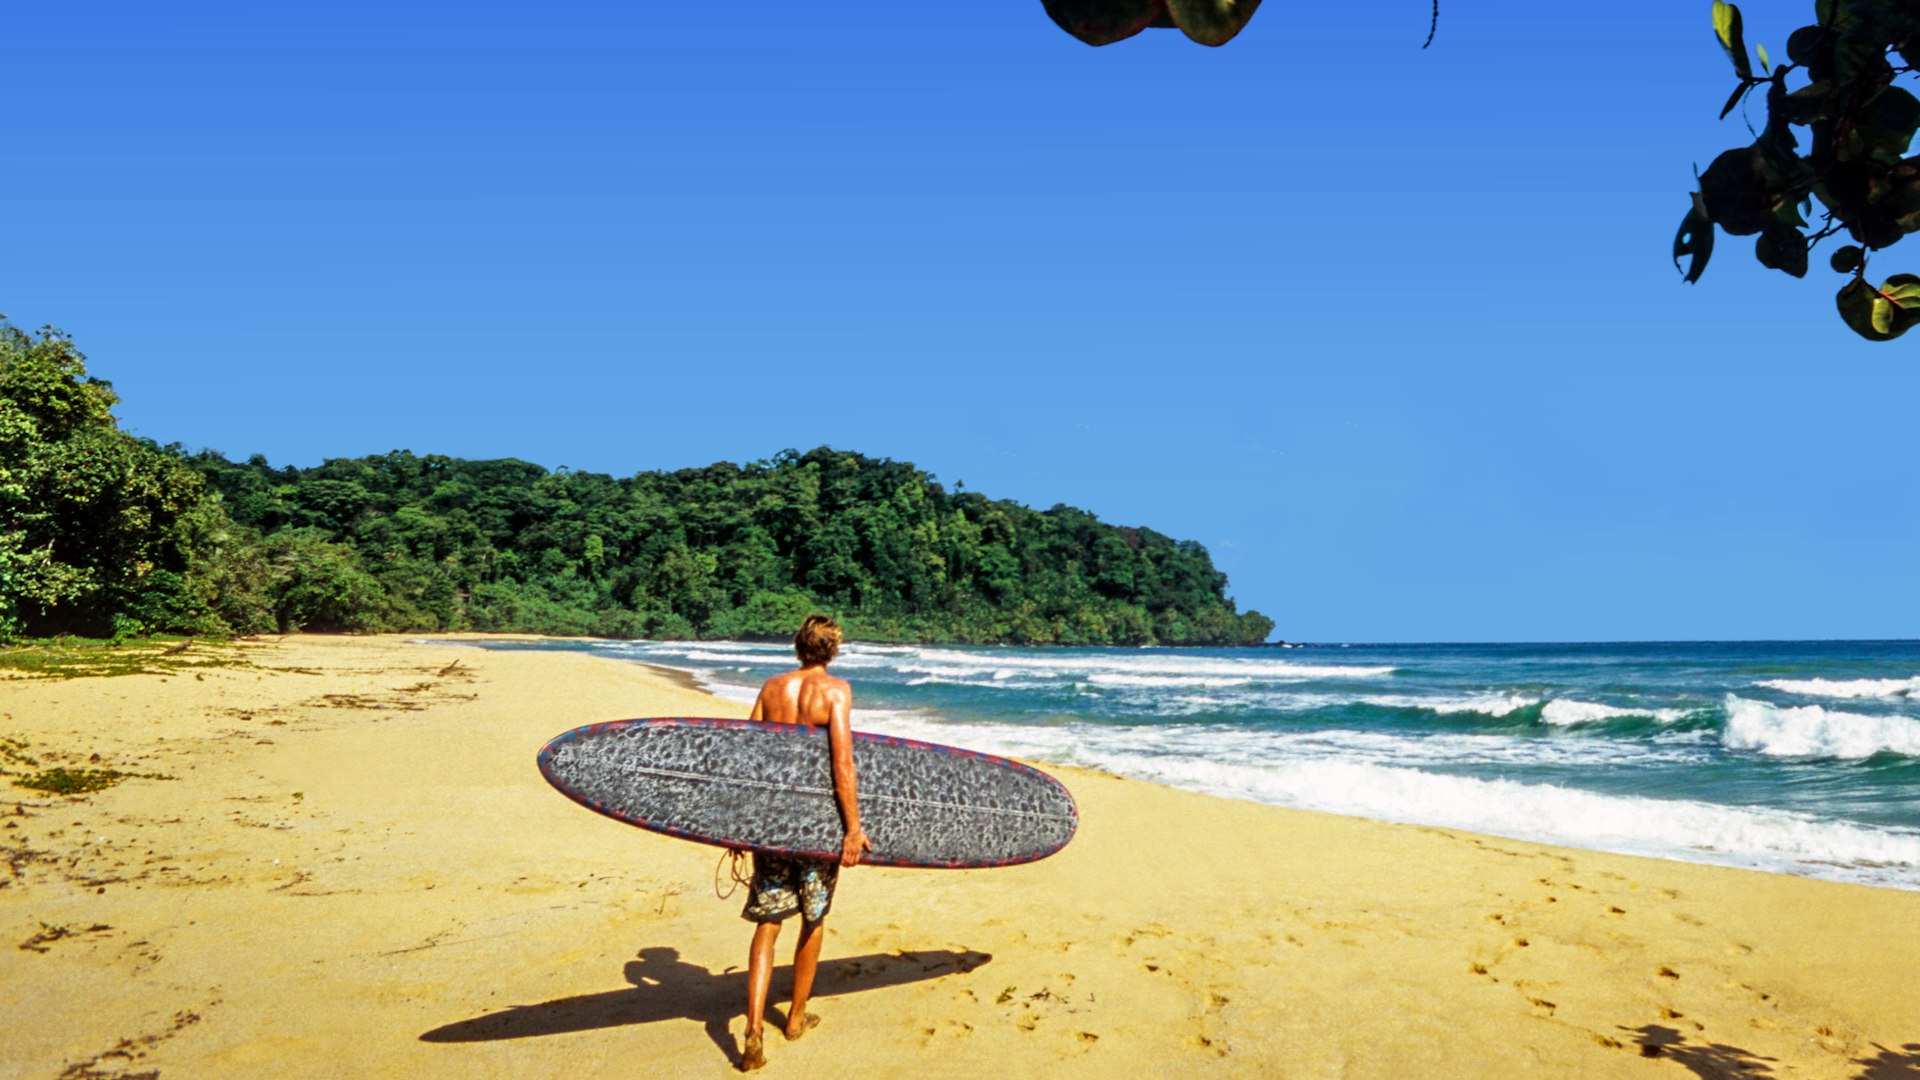 A surfer carrying a board heads for the sea at a deserted beach backed by dense jungle